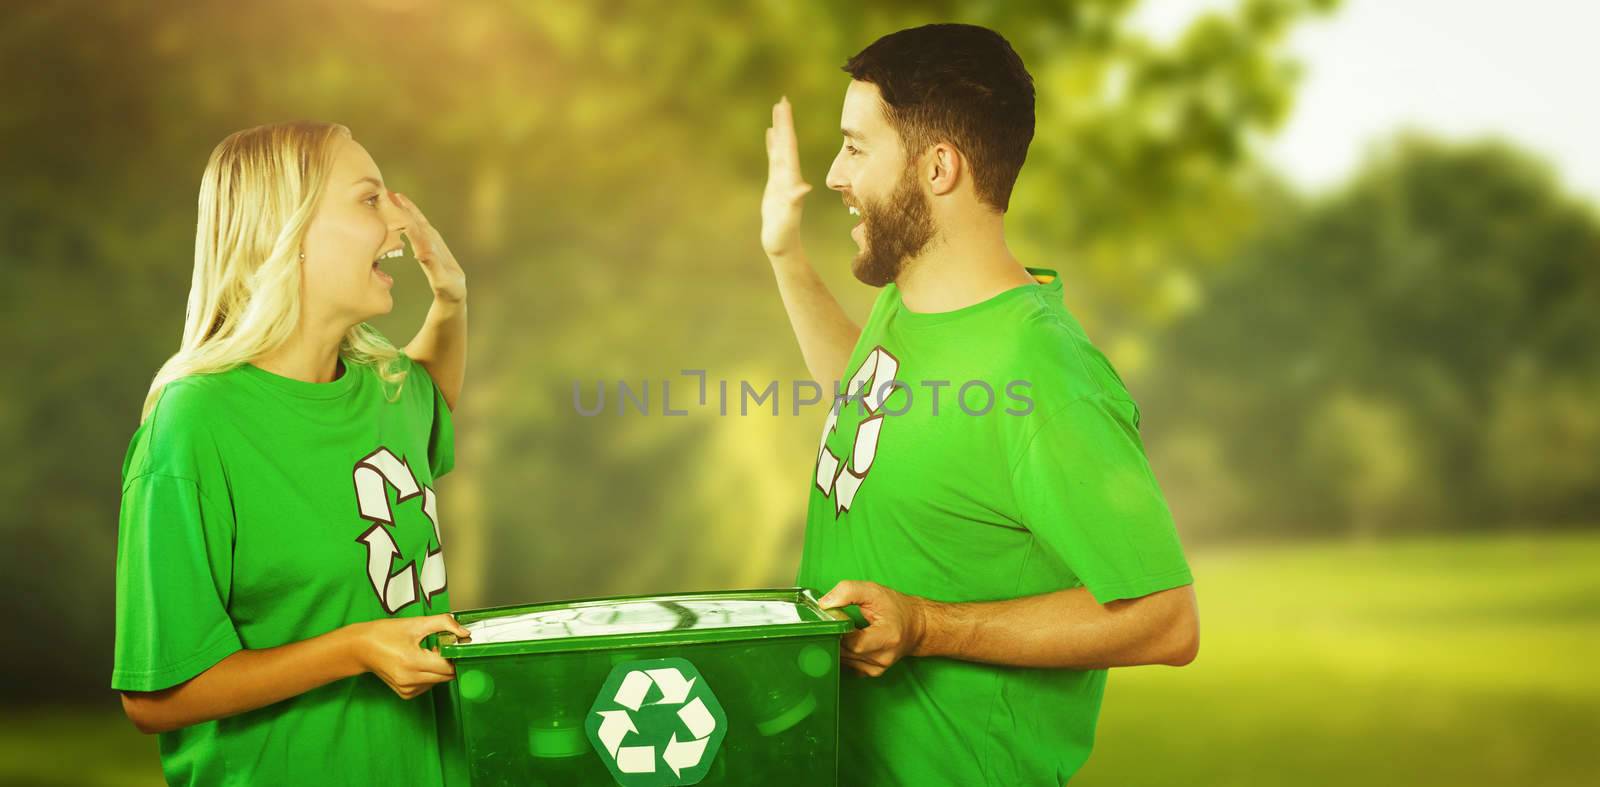 Composite image of smiling volunteer doing high five while holding container  by Wavebreakmedia